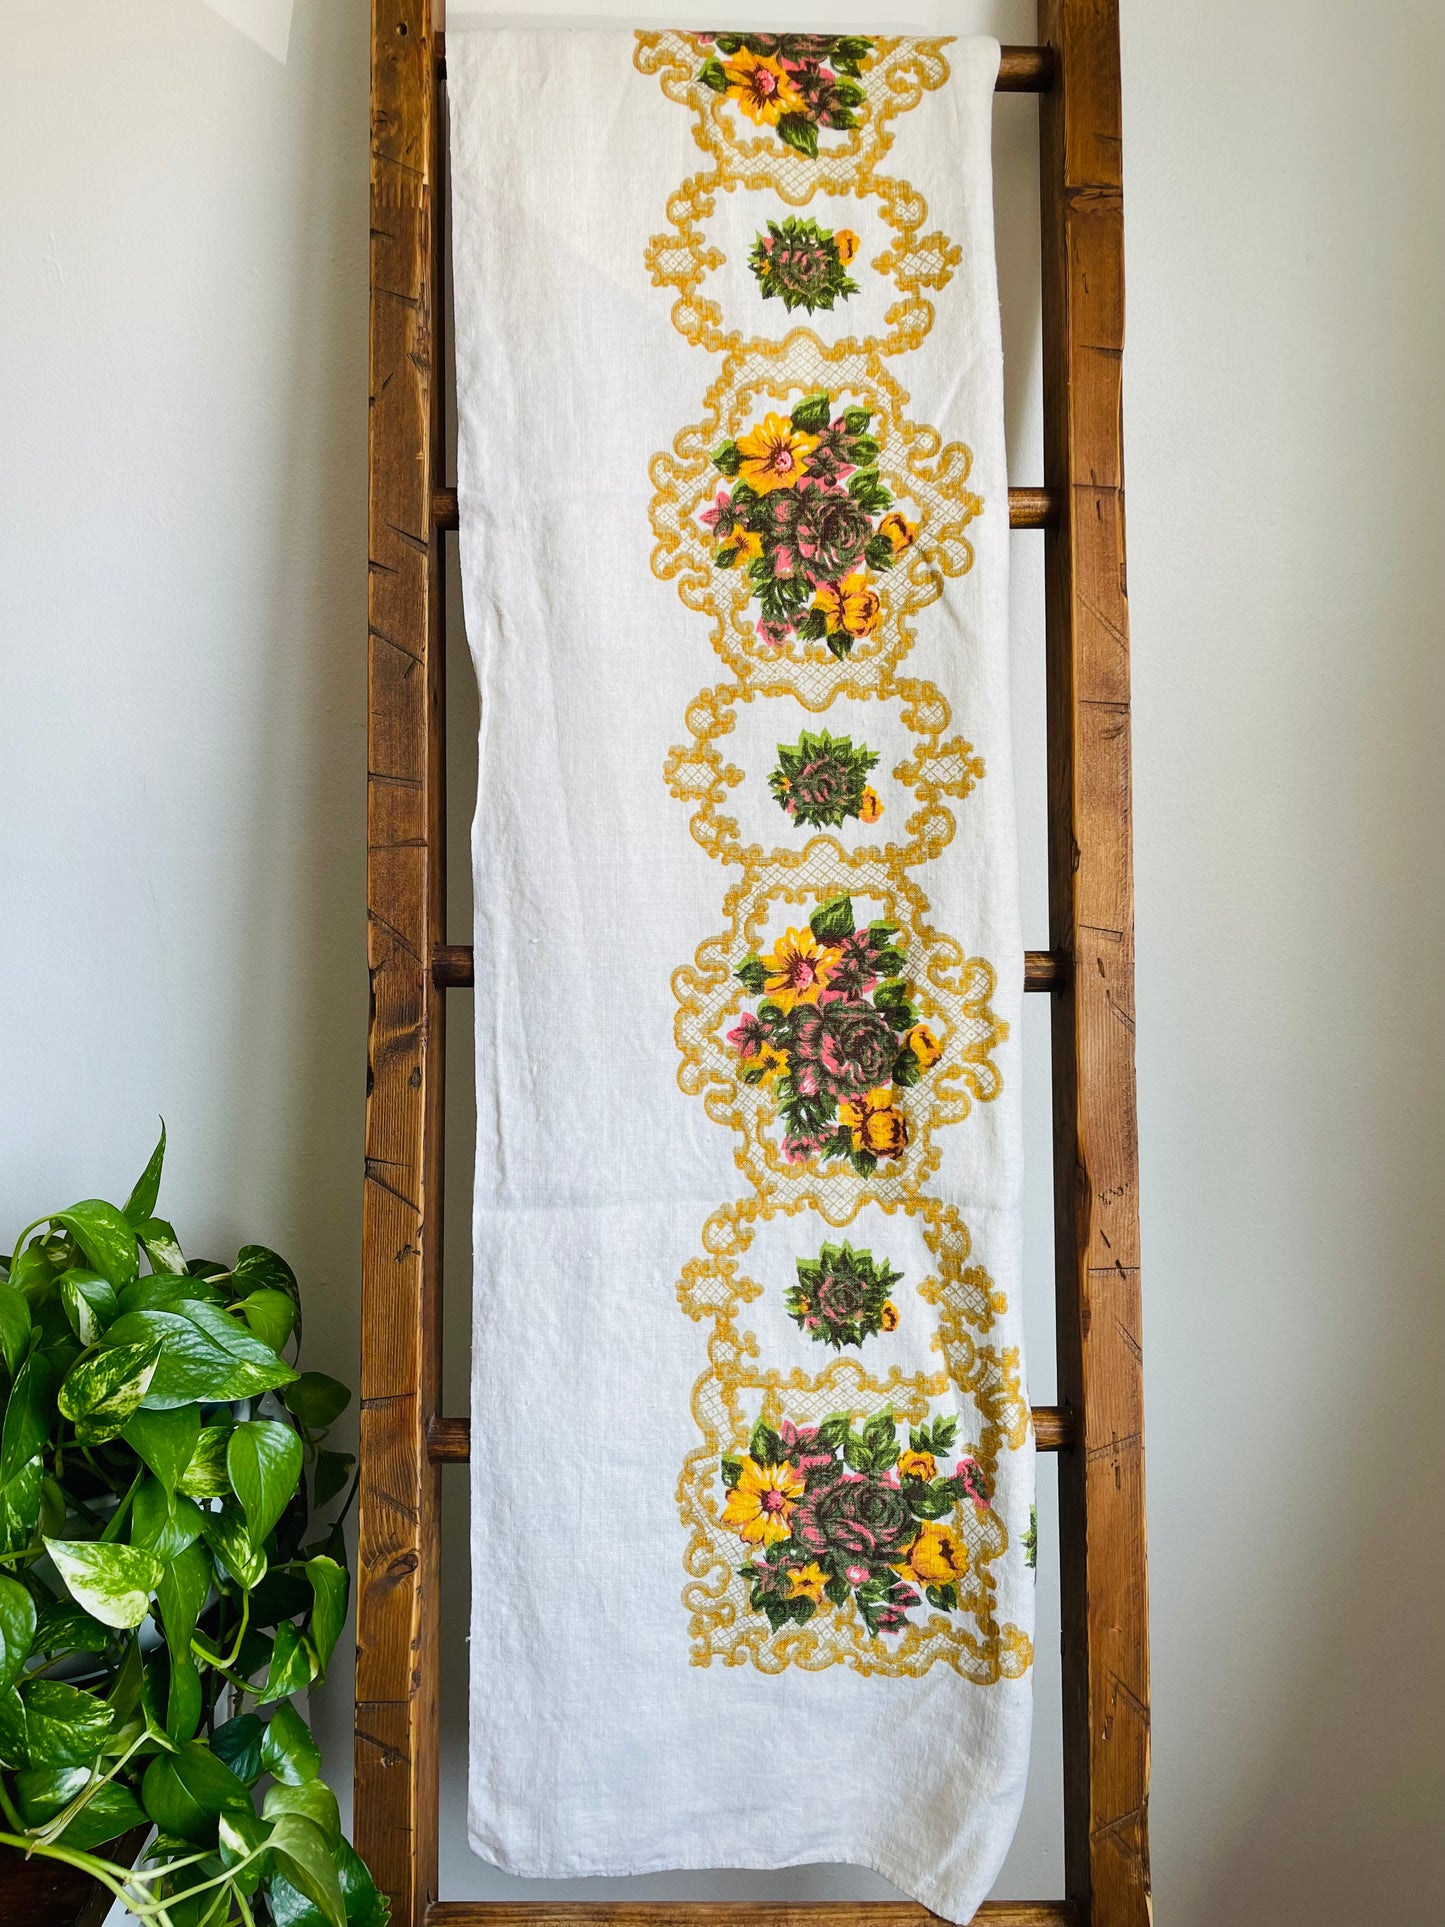 Linen Tablecloth with Yellow Flowers - Also Makes Great Fabric!